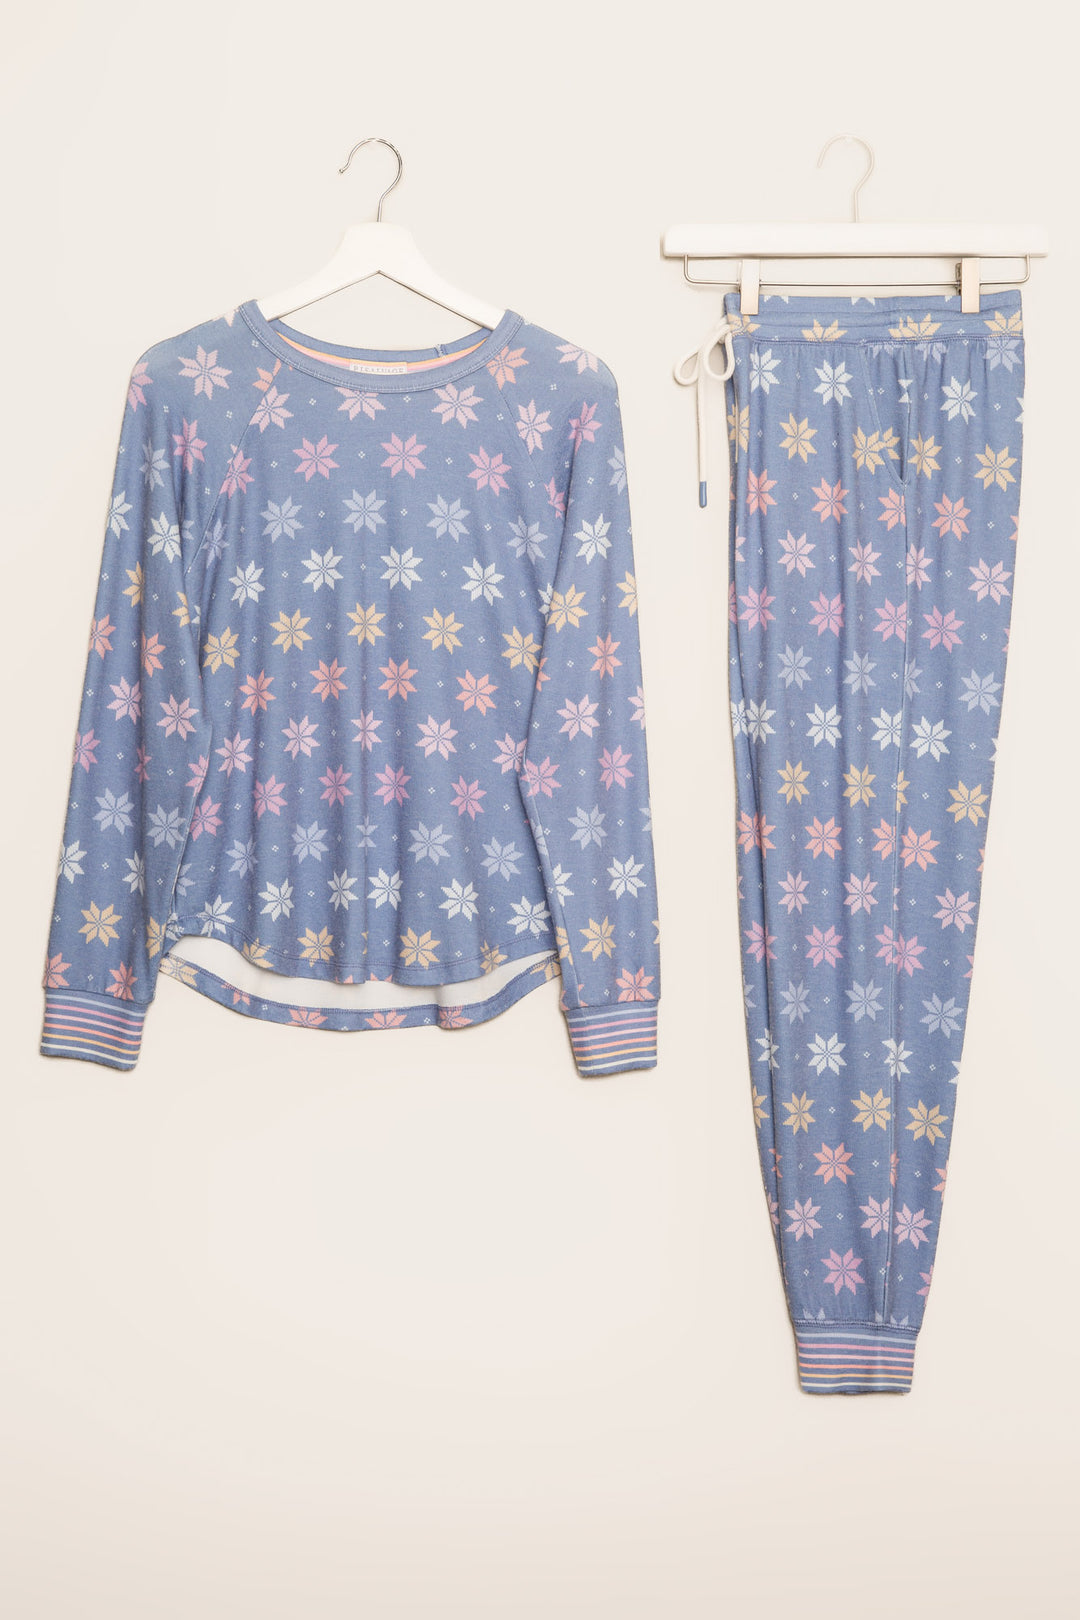 PJ jammie set in blue with pastel snowflake pattern. Top & pant with striped cuffs. (7231878824036)